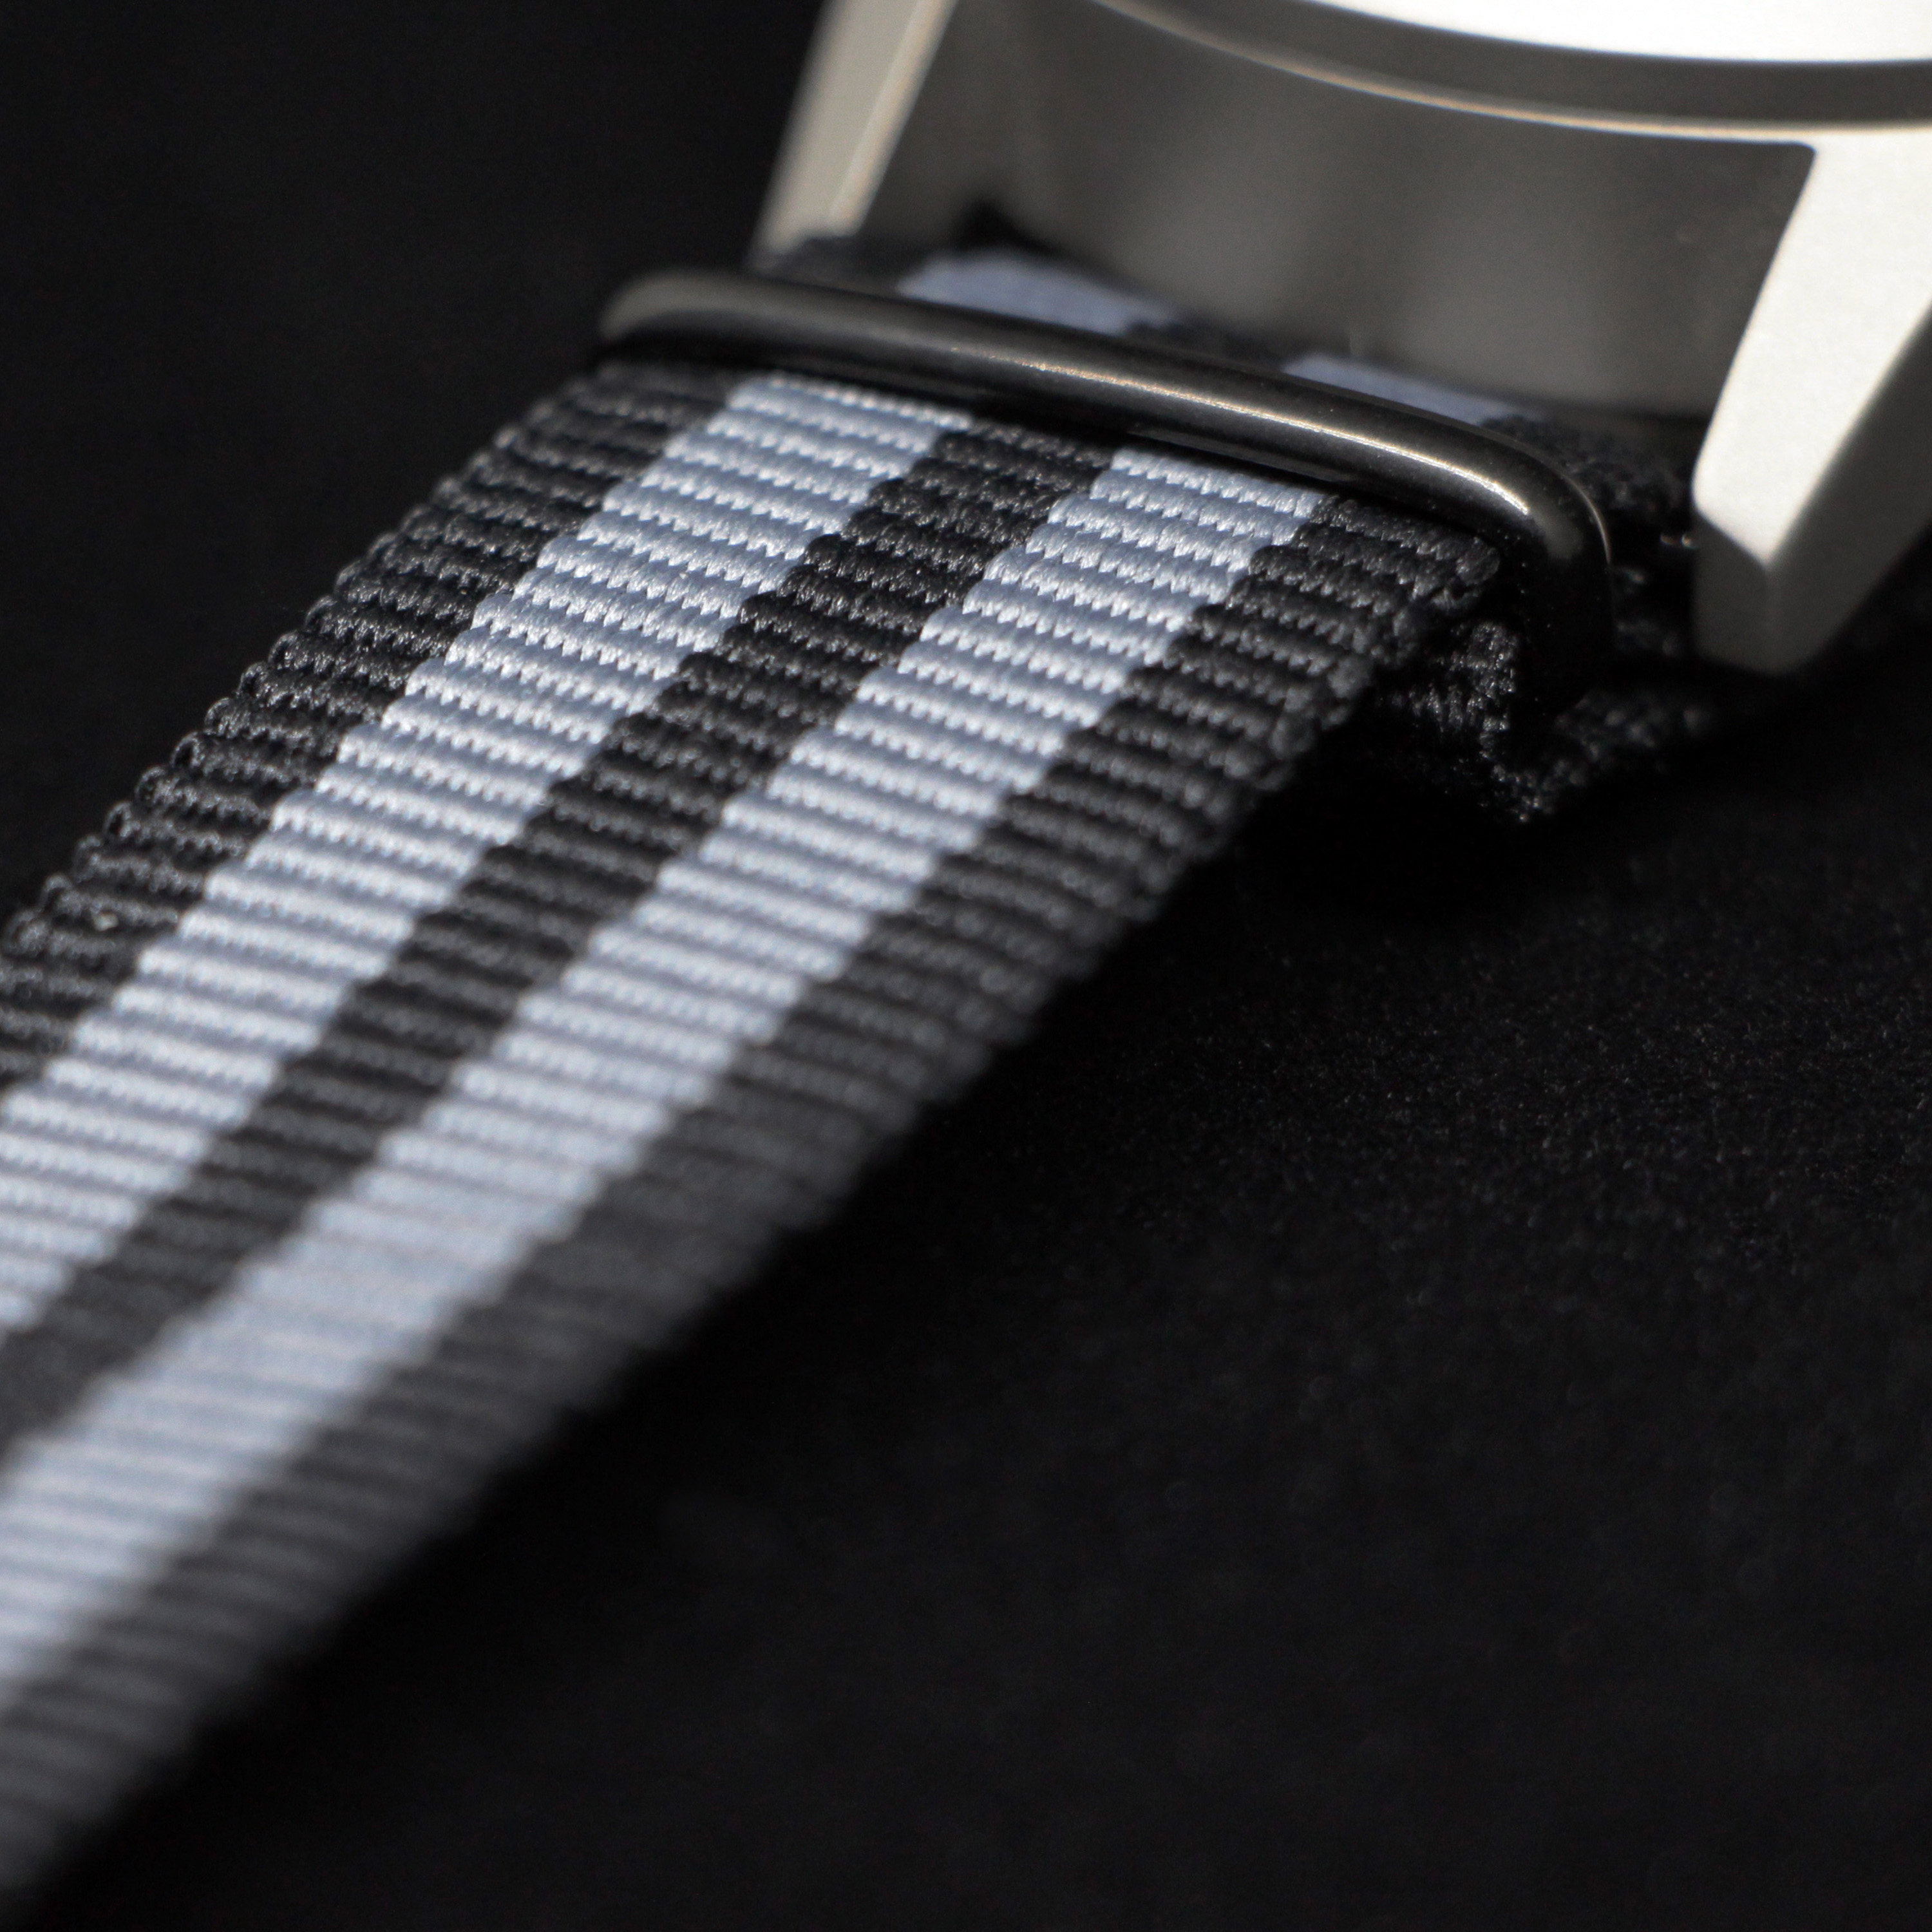 NATO strap wristband (one of the two wristbands included with the Type 77.MOVE)